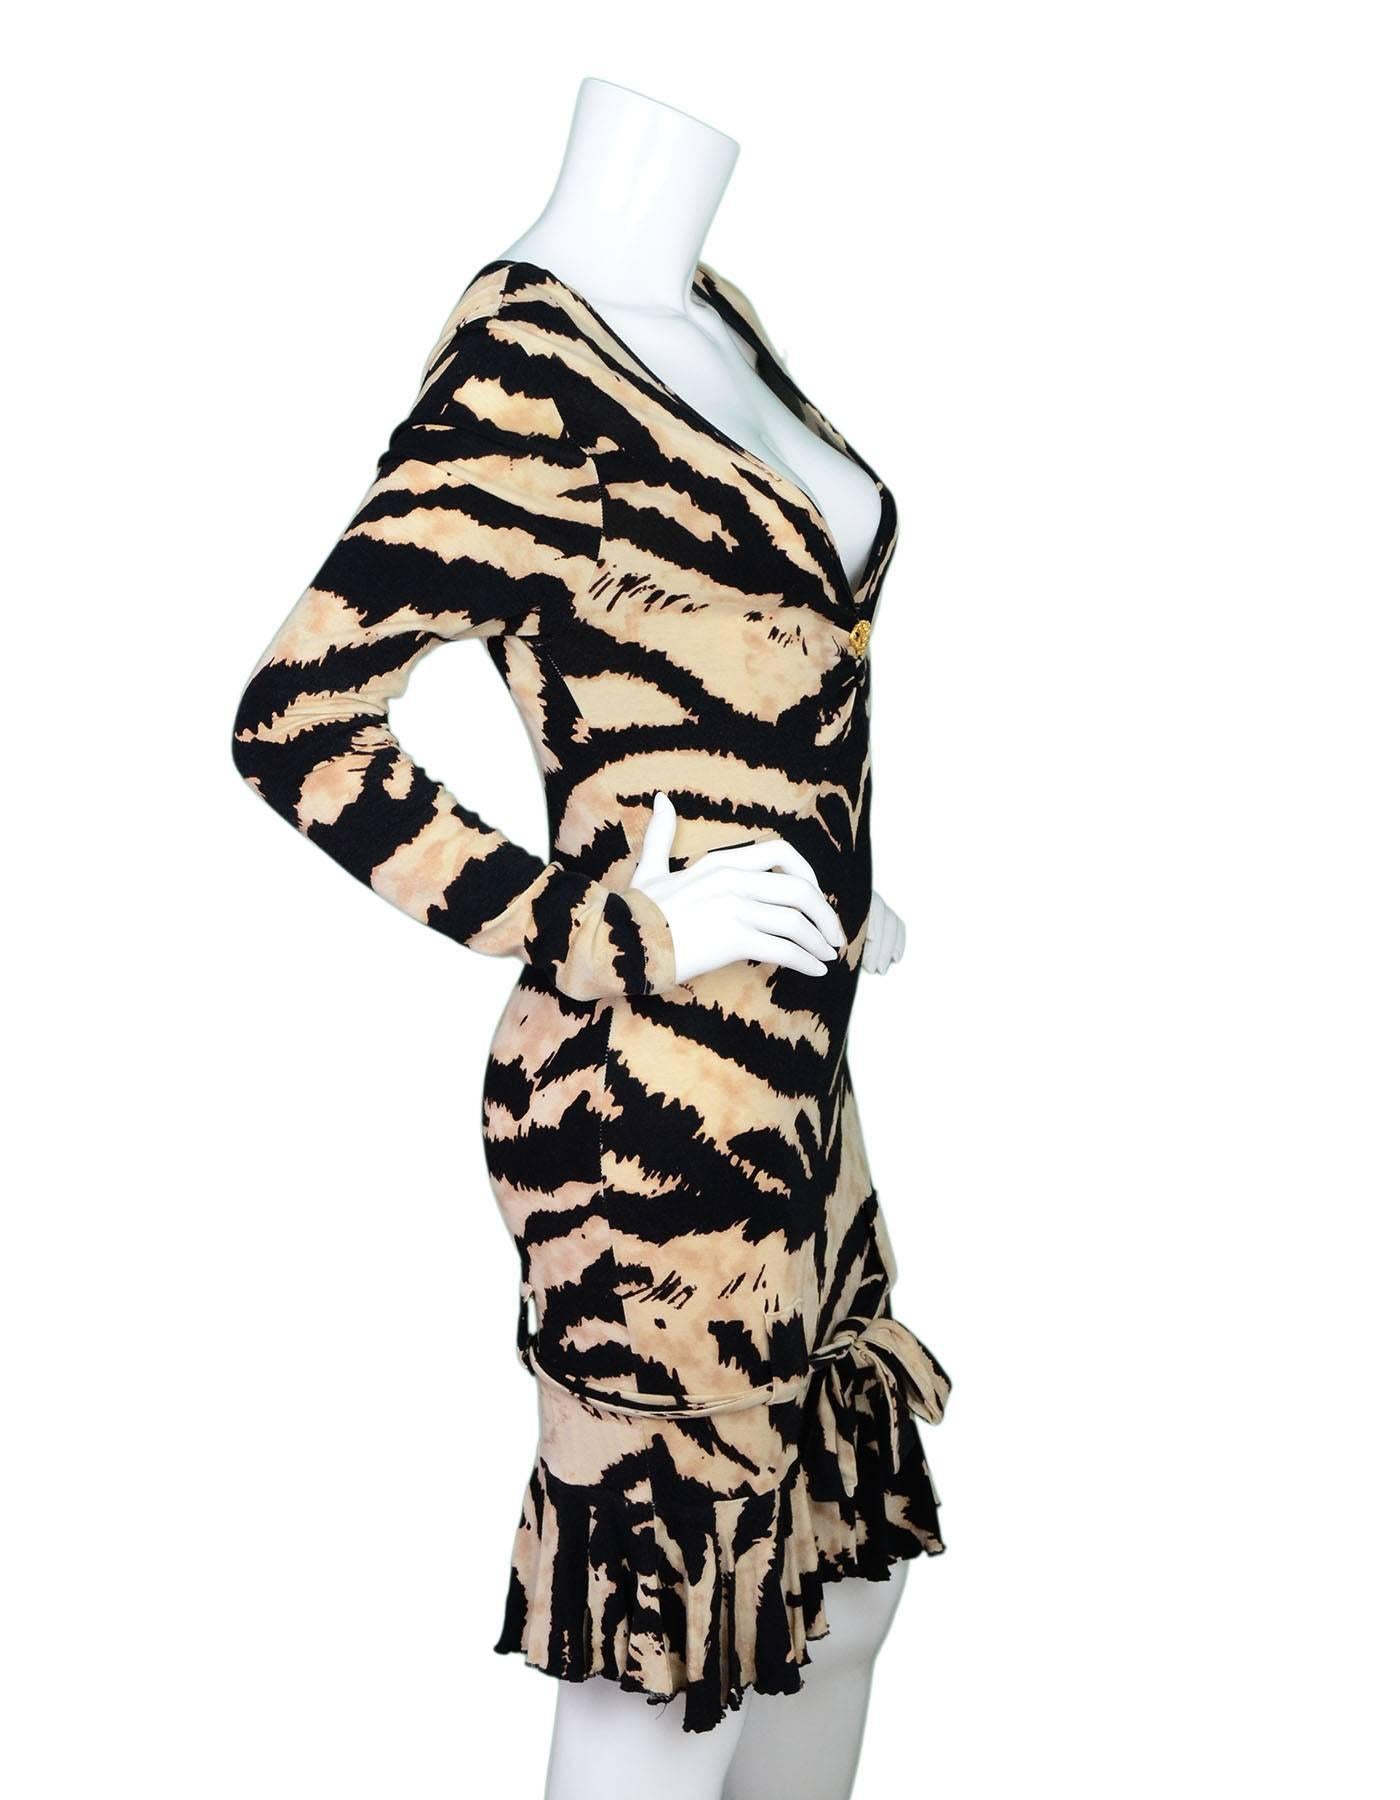 Roberto Cavalli Tiger Print Long Sleeve Dress 
Features plunging neckline with goldtone and crystal serpent charm as well as ruffles at hemline

Made In: Italy
Color: Black, brown and tan
Composition: 94% viscose, 6% elastane
Lining: